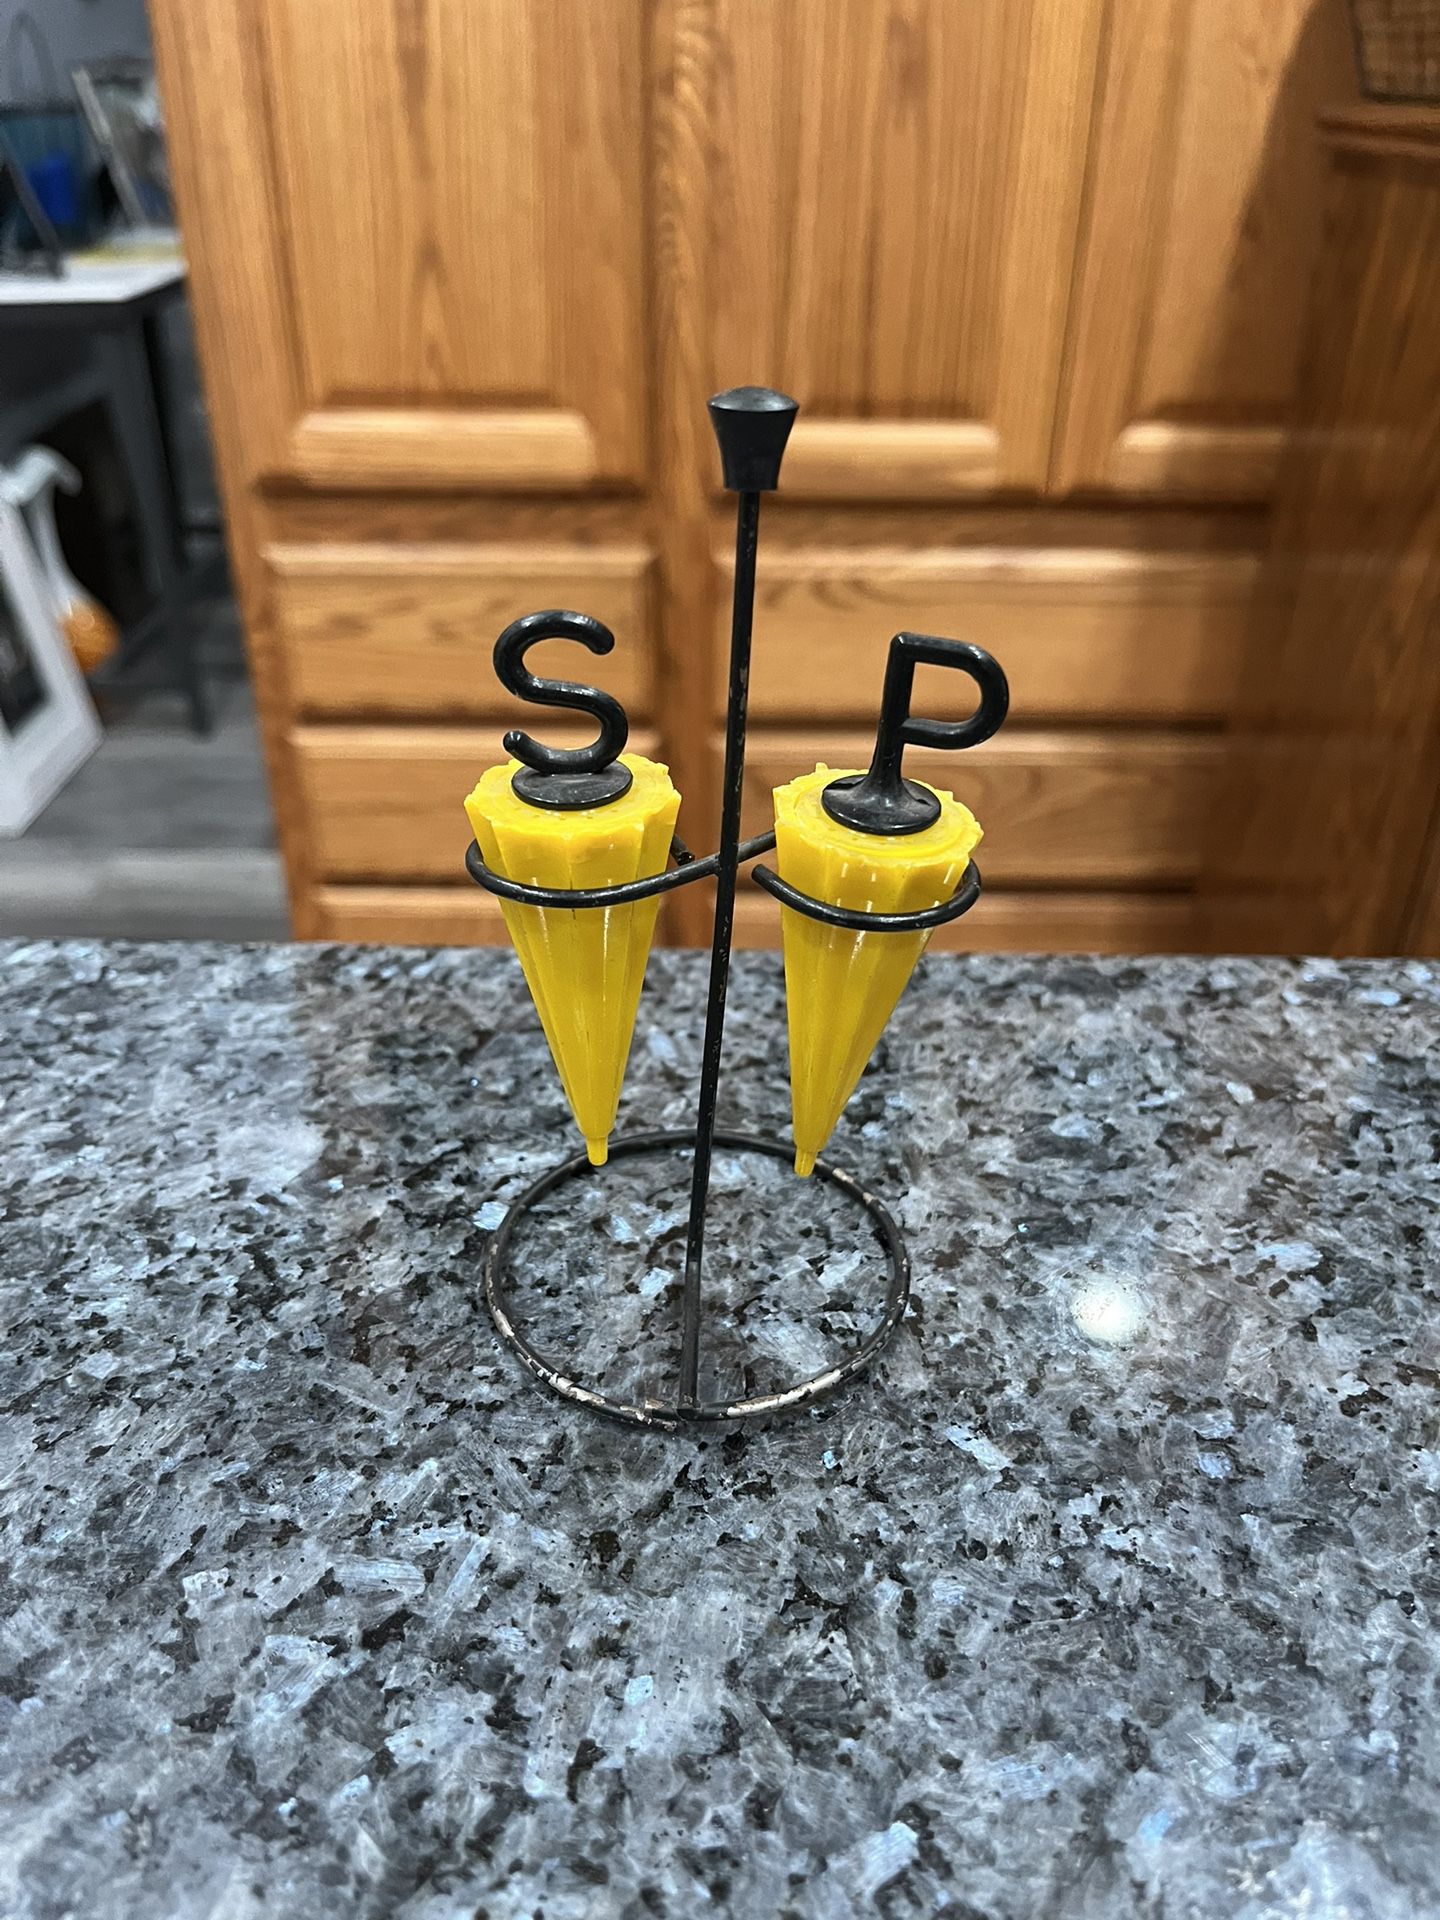 Vintage Plastic Umbrella Pair Of Salt And Pepper Shakers.  Preowned Used Some Paint Is Worn Off On The Stand.  